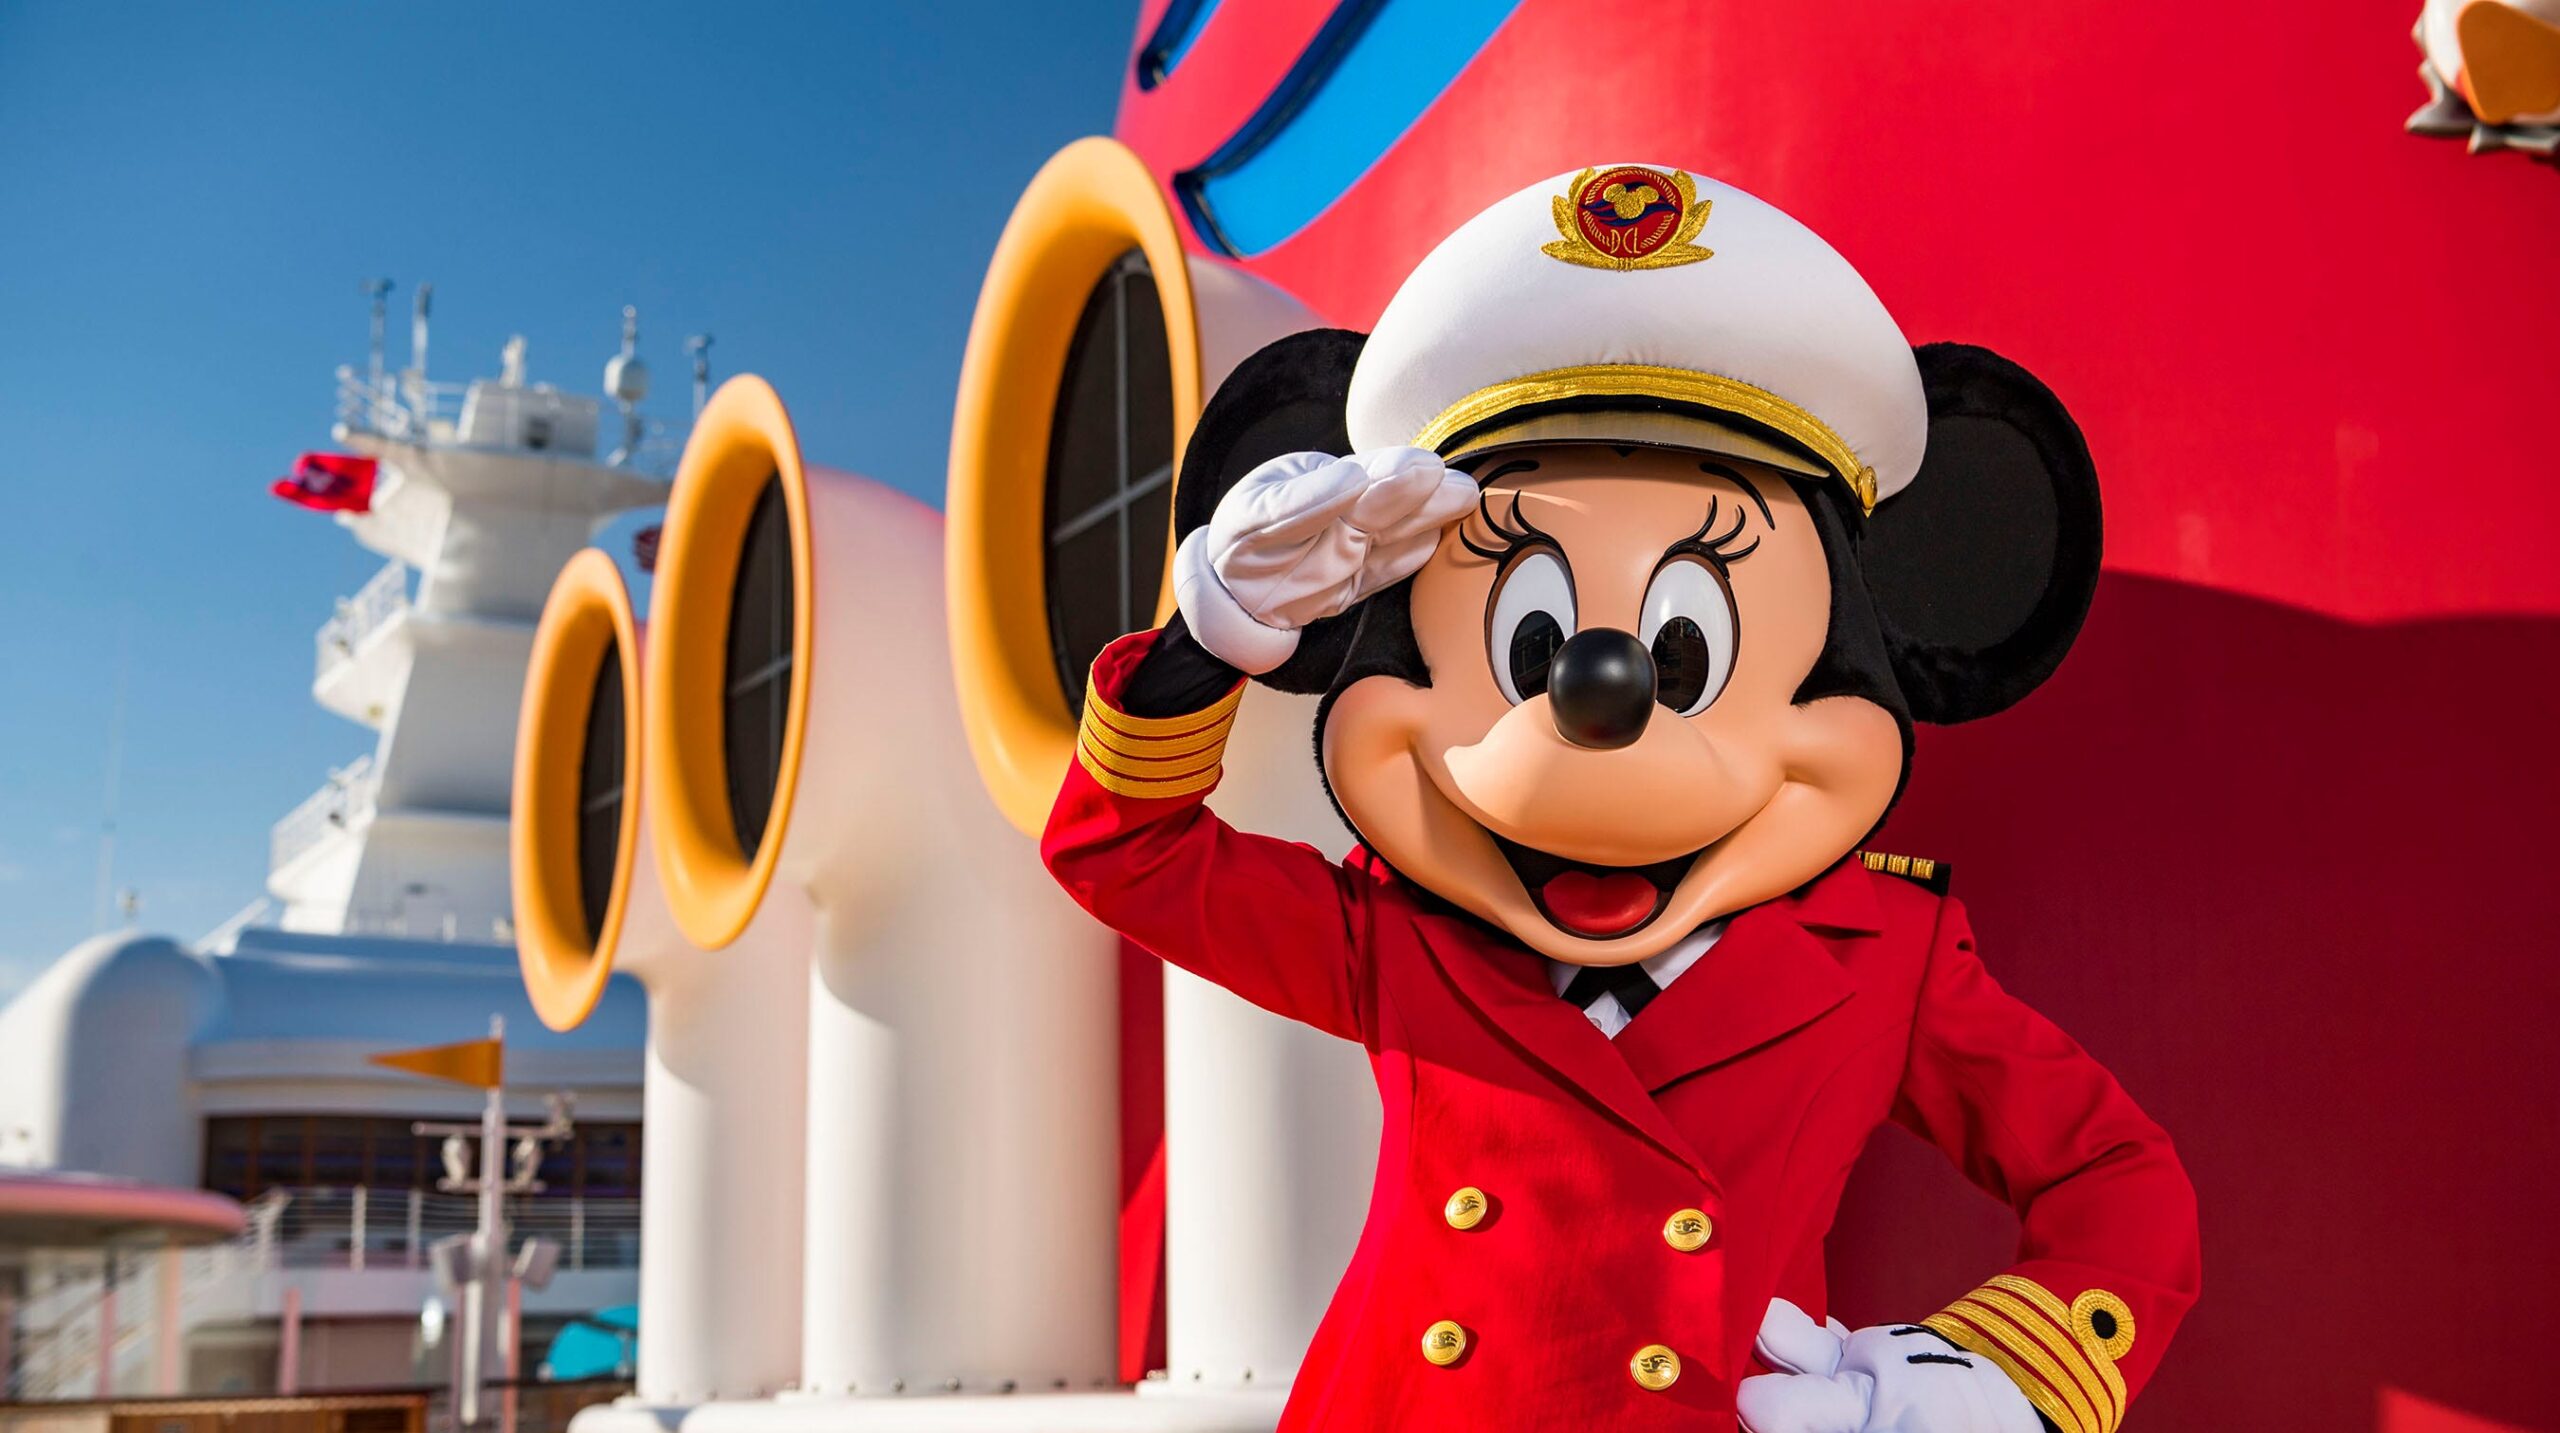 Enjoy peace of mind when booking your Disney cruise with new modifications